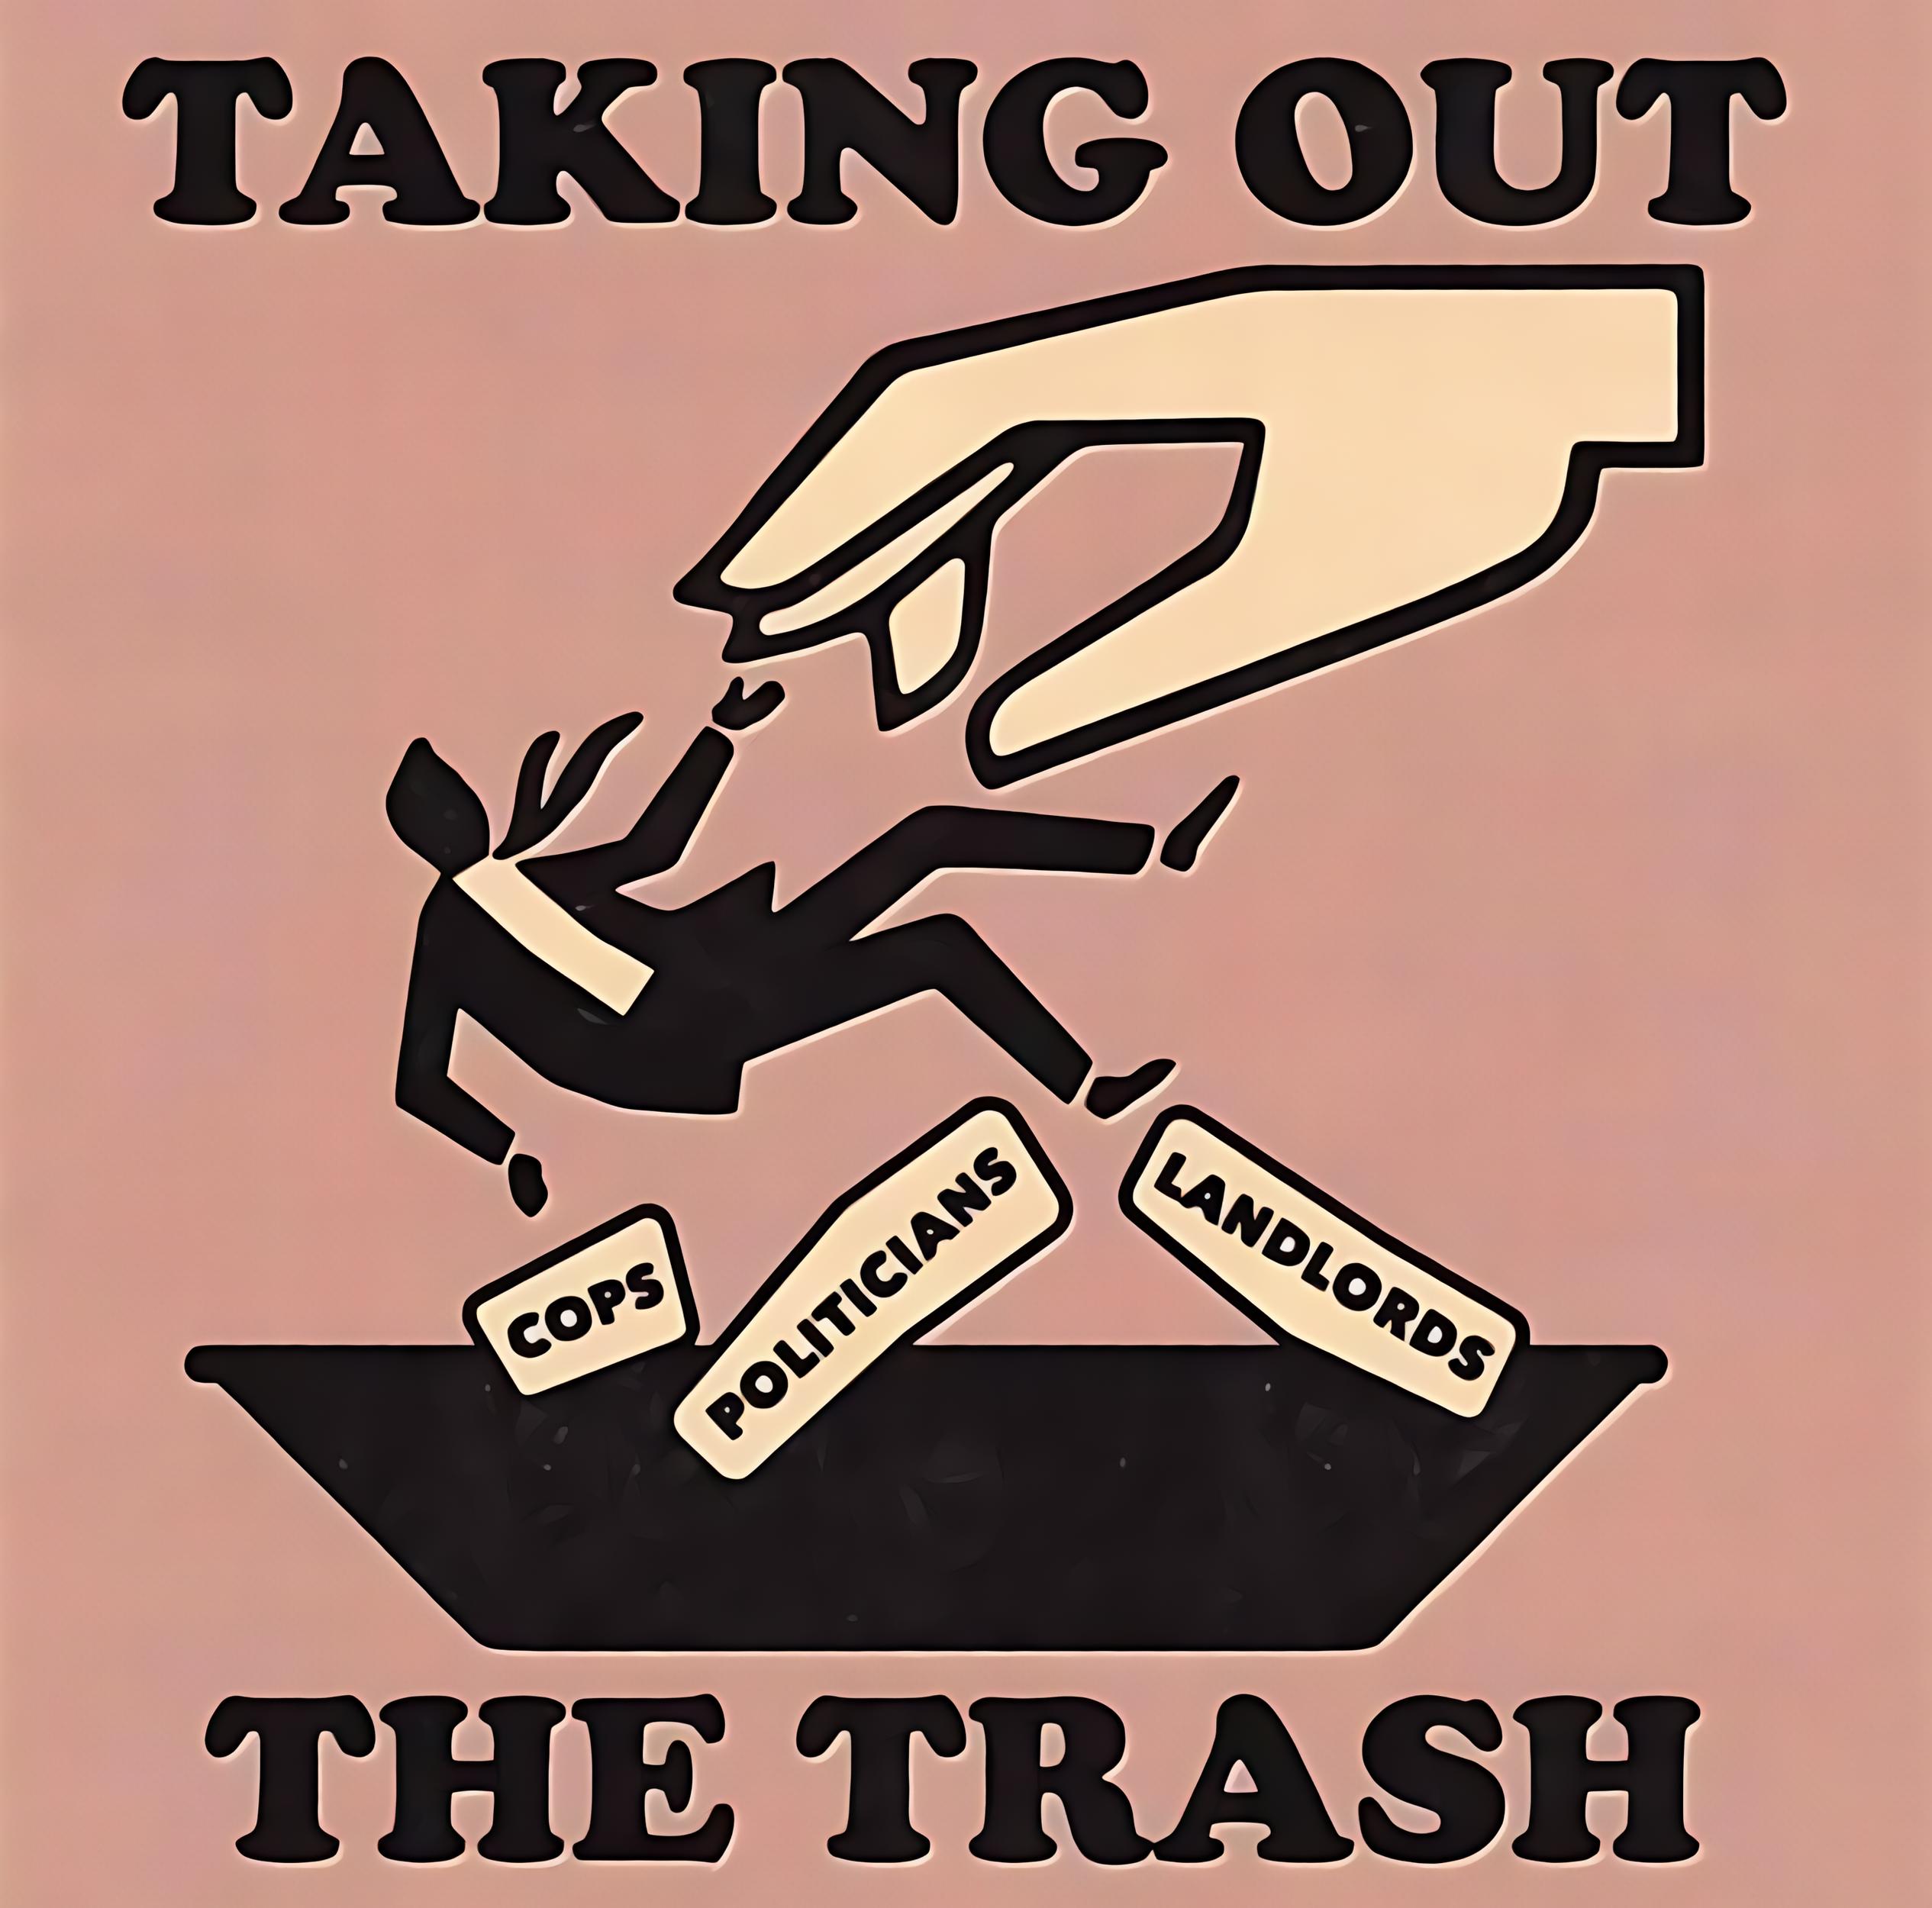 Taking out the trash